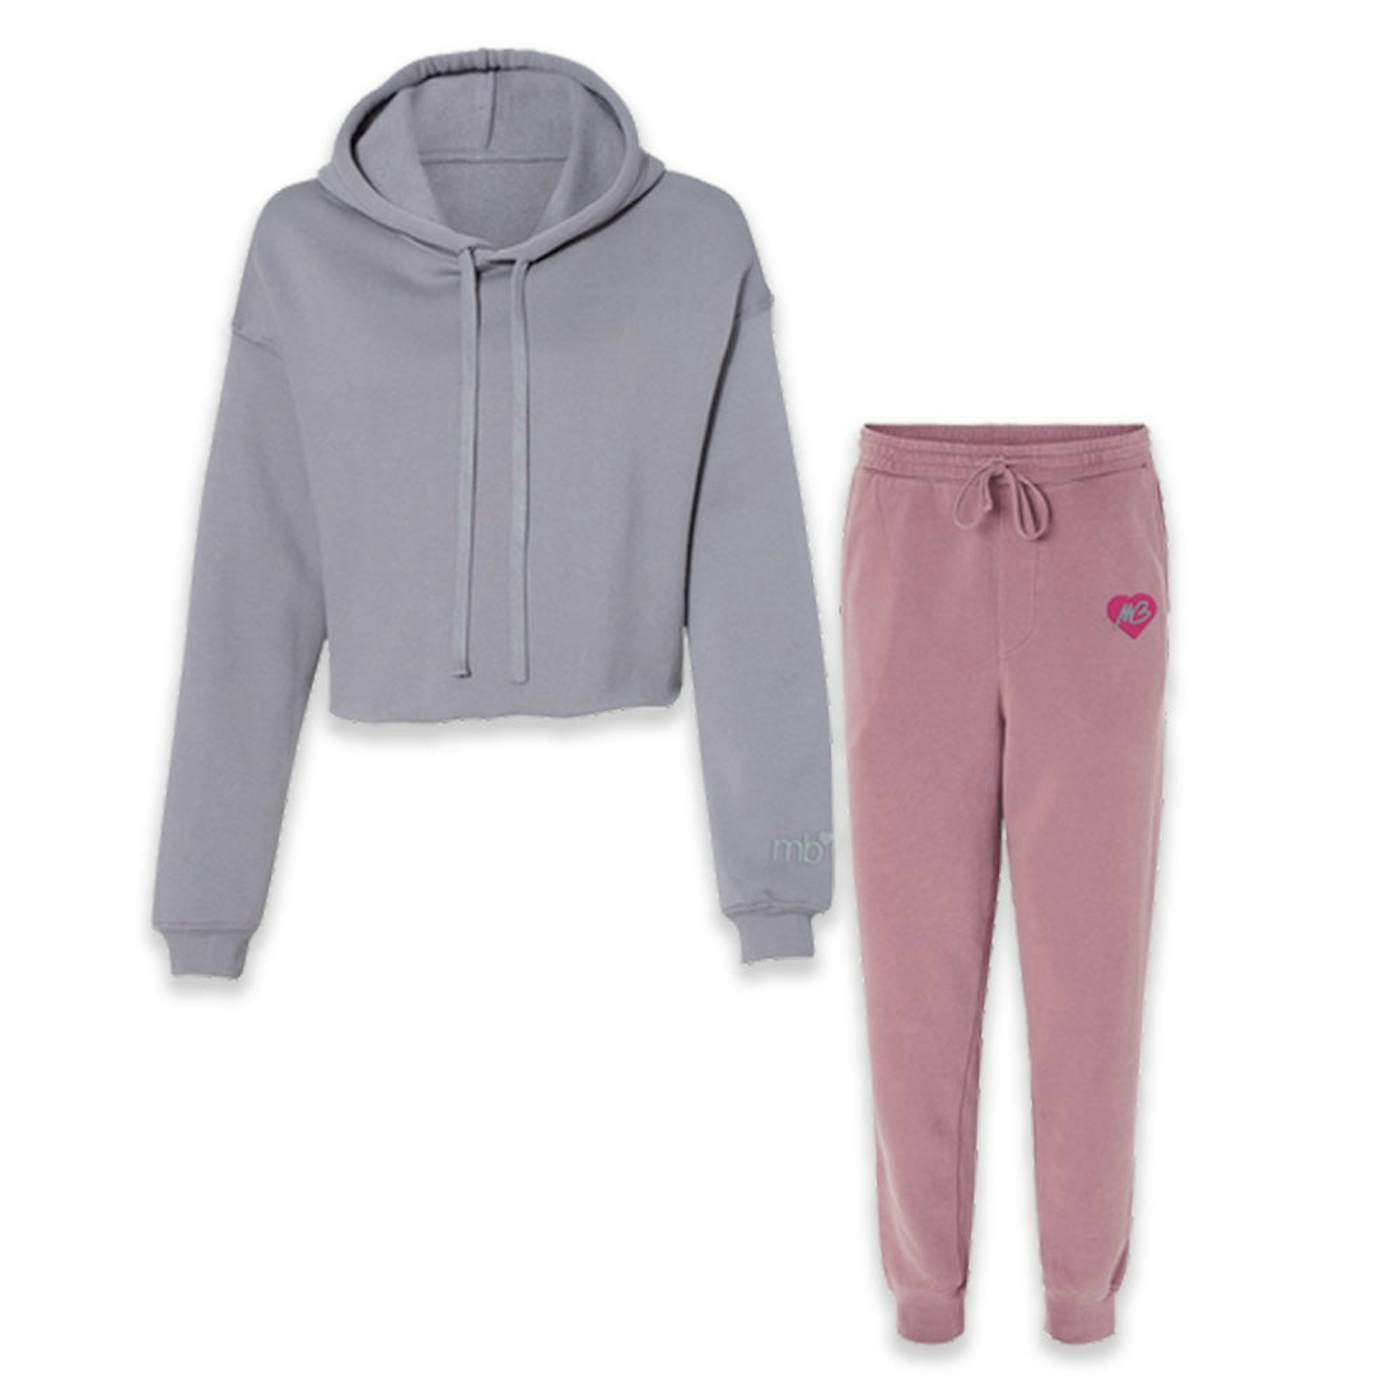 Michael Bublé MB Heart Logo Embroidered Sweatsuit Set